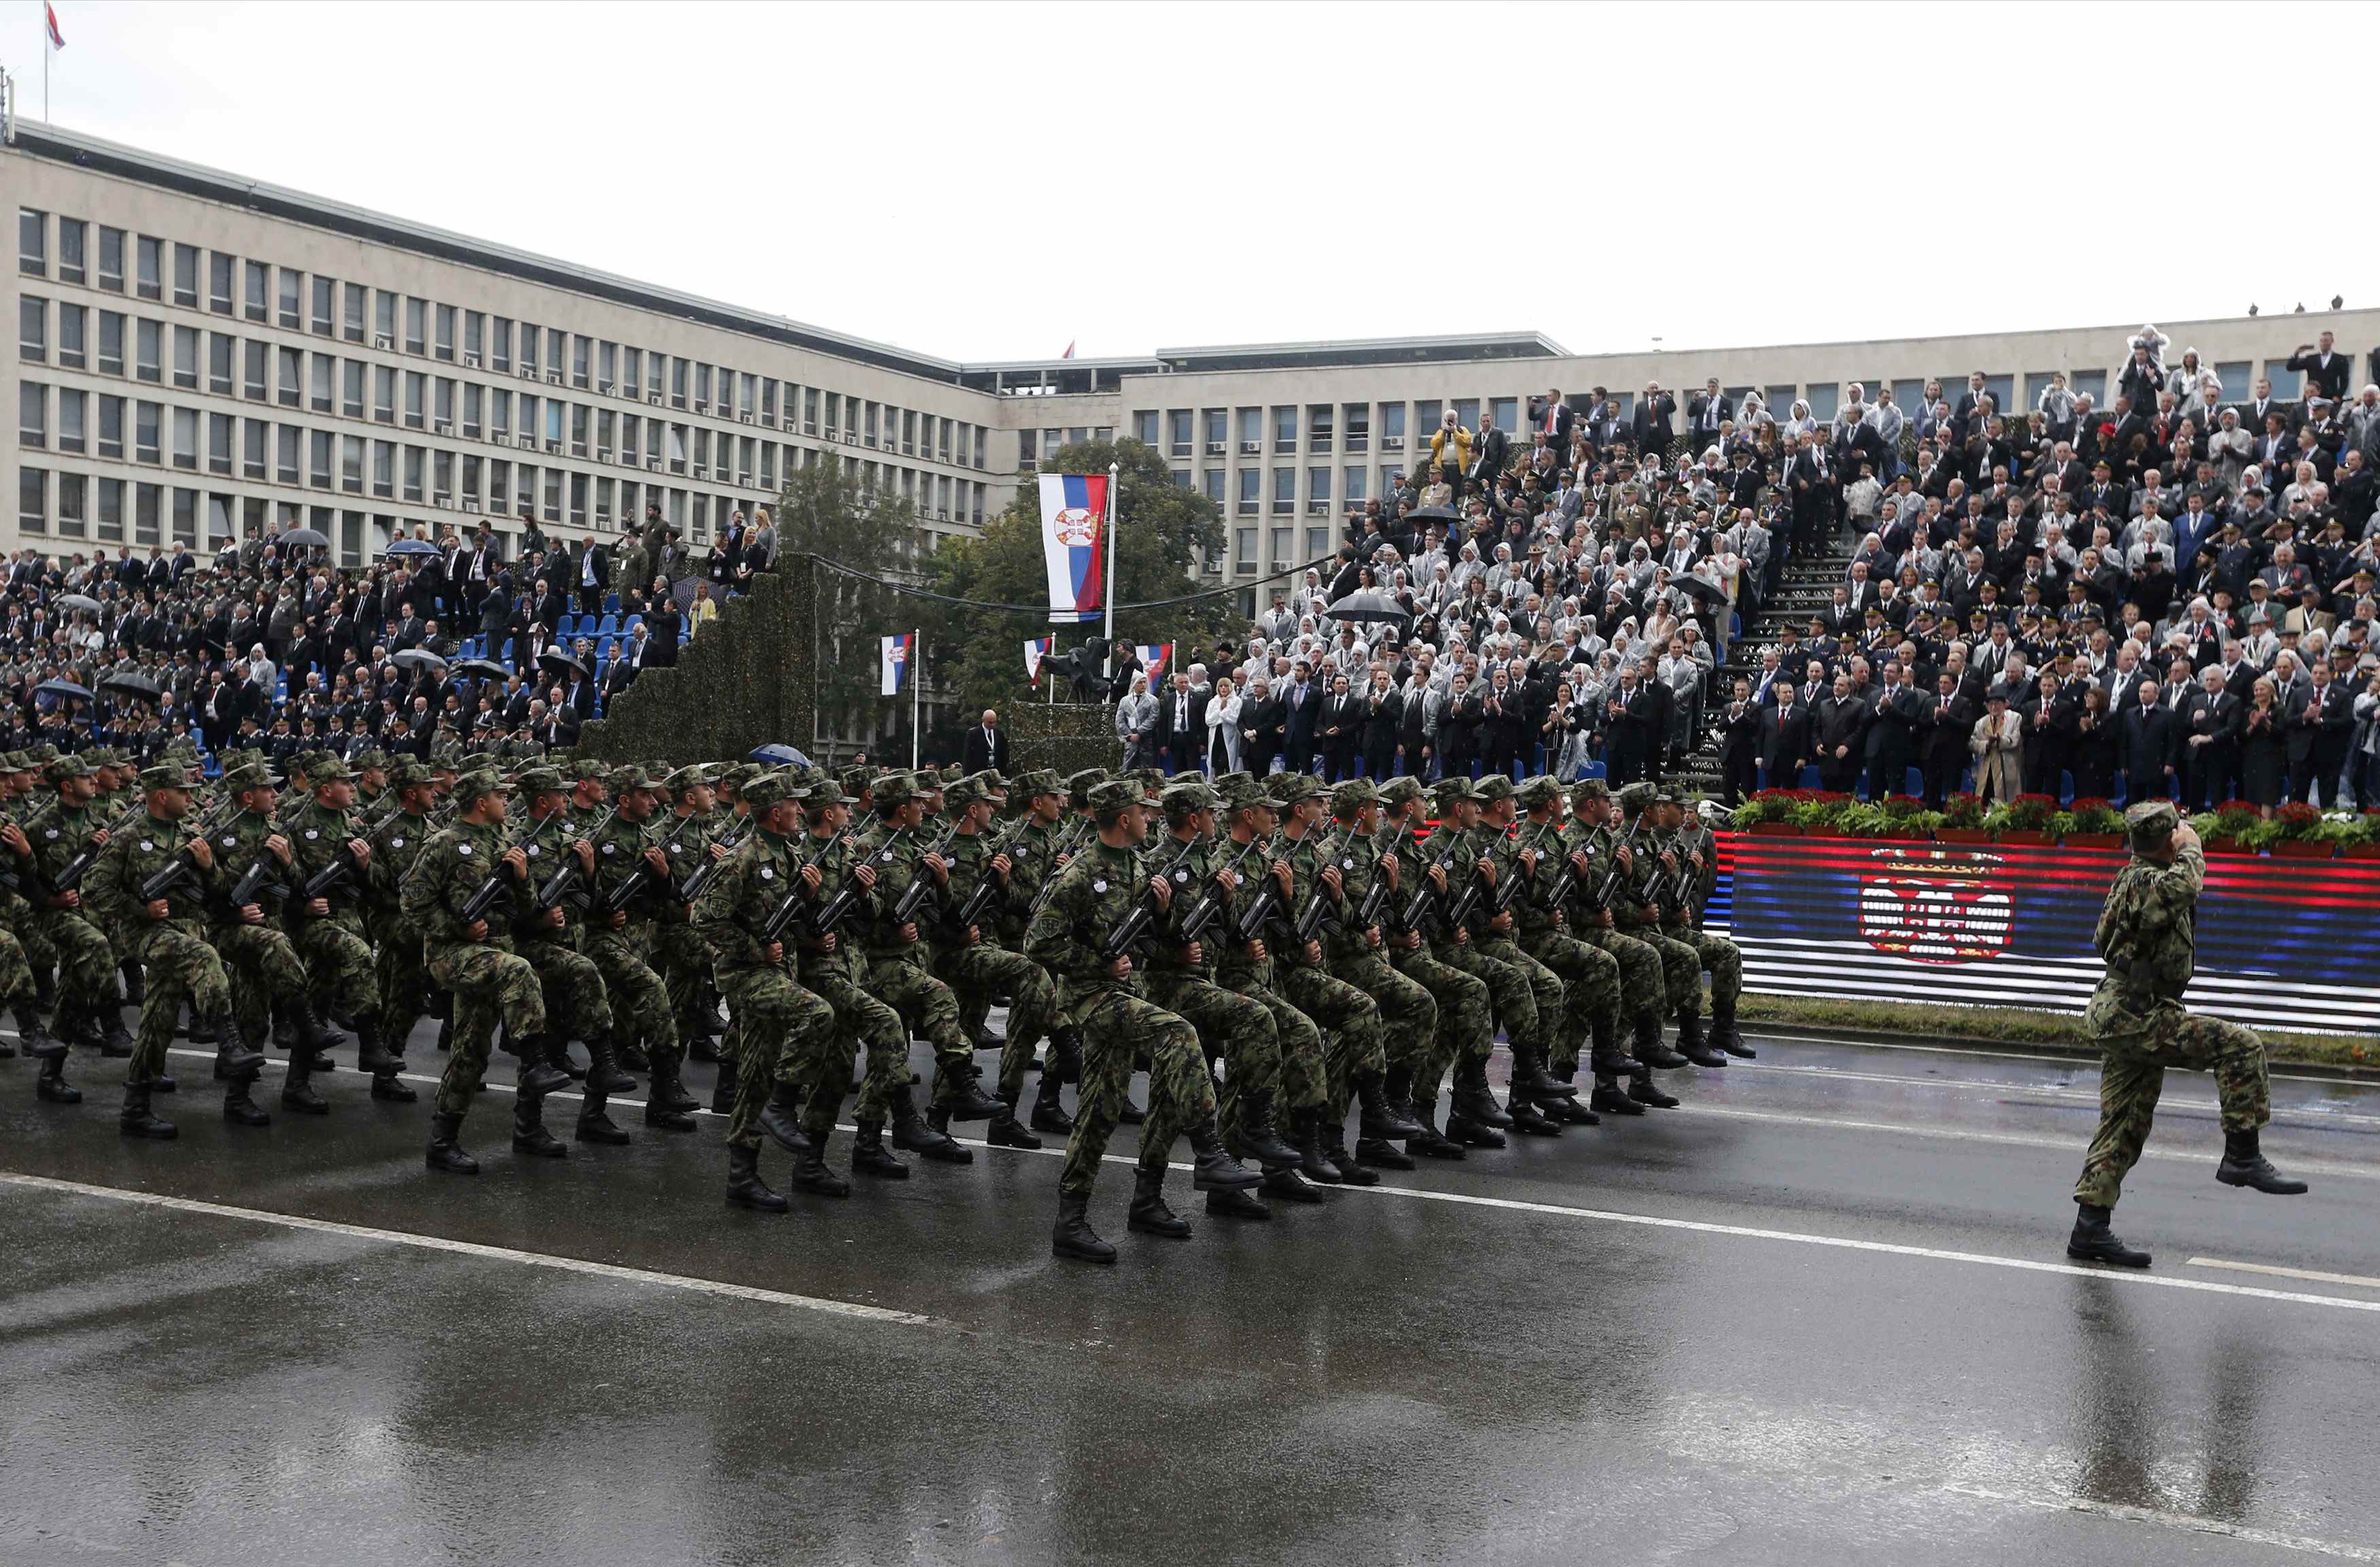 REFILE - QUALITY REPEAT Serbian troops march during a military parade to mark 70 years since the city's liberation by the Red Army in Belgrade October 16, 2014. Serbia feted Russia's Vladimir Putin with troops, tanks and fighter-jets on Thursday to mark seven decades since the Red Army liberated Belgrade, balancing its ambitions of European integration with enduring reverence for a big-power ally deeply at odds with the West. REUTERS/Marko Djurica (SERBIA - Tags: POLITICS MILITARY ANNIVERSARY)